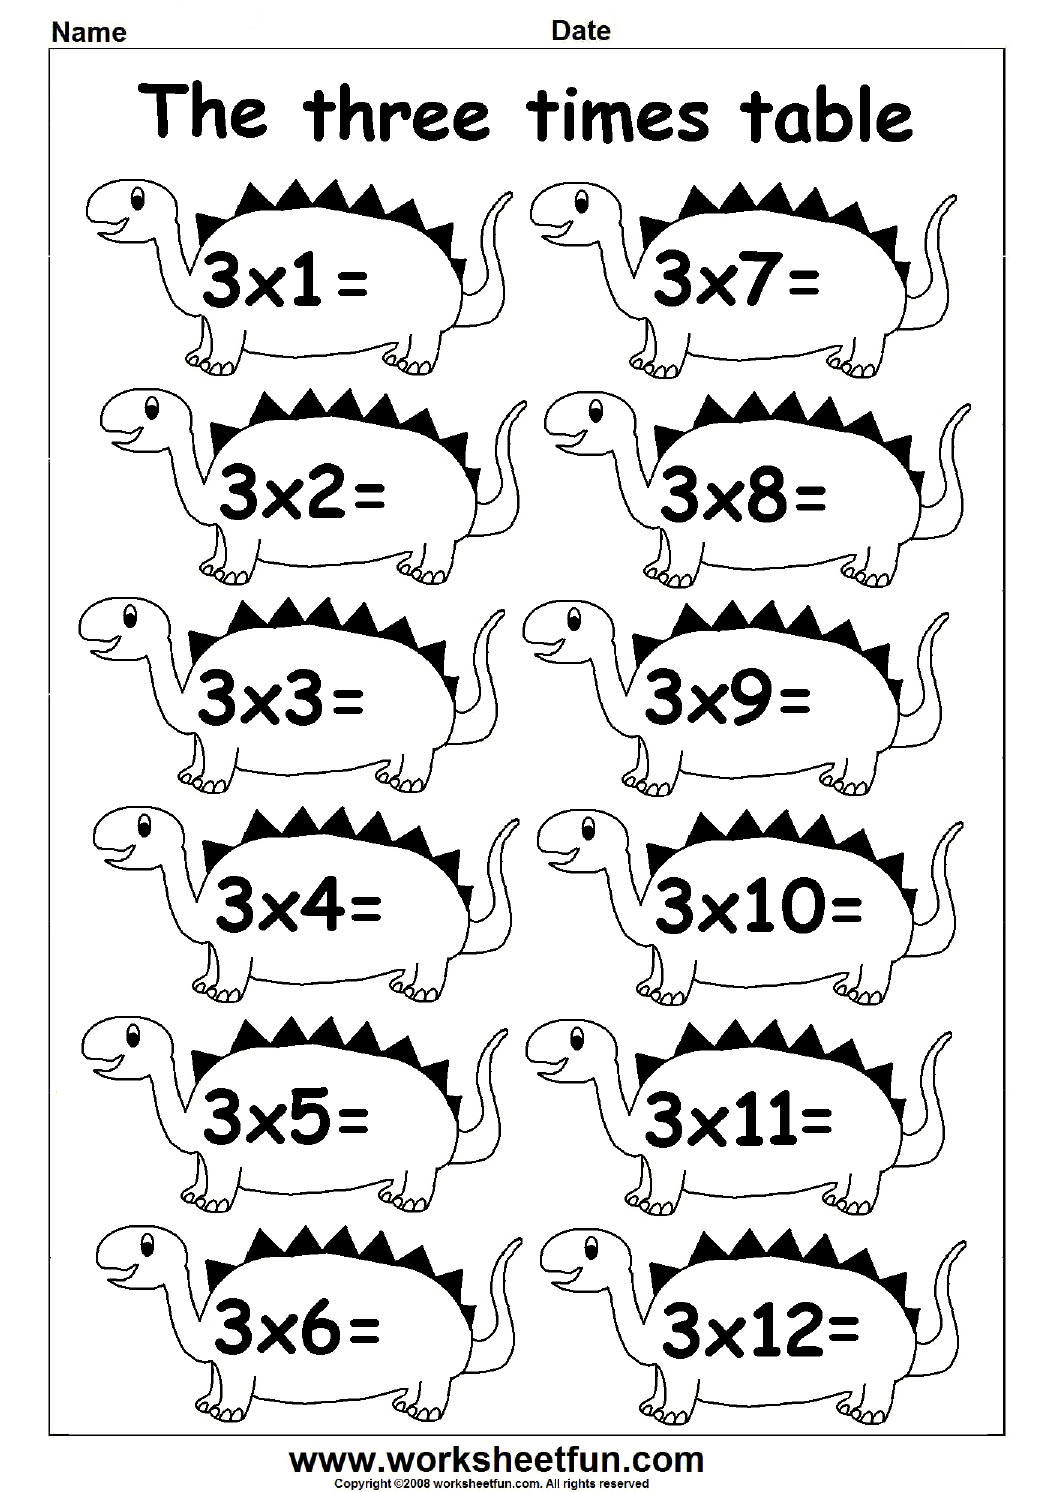 multiplication-worksheets-3-and-4-times-tables-printable-multiplication-worksheets